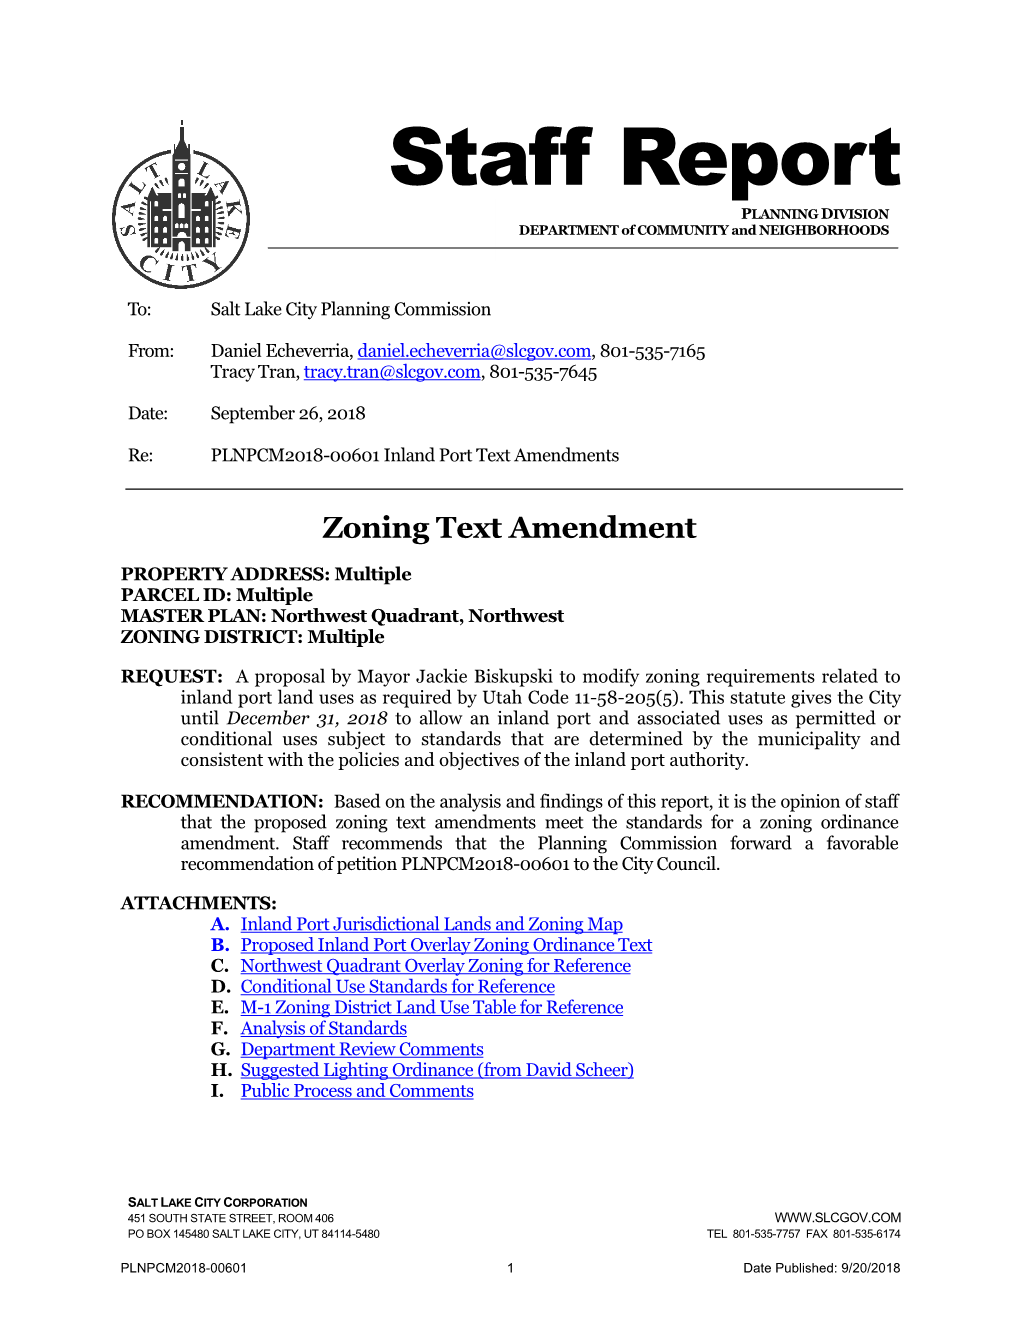 Inland Port Zoning Modifications Per HB 2001